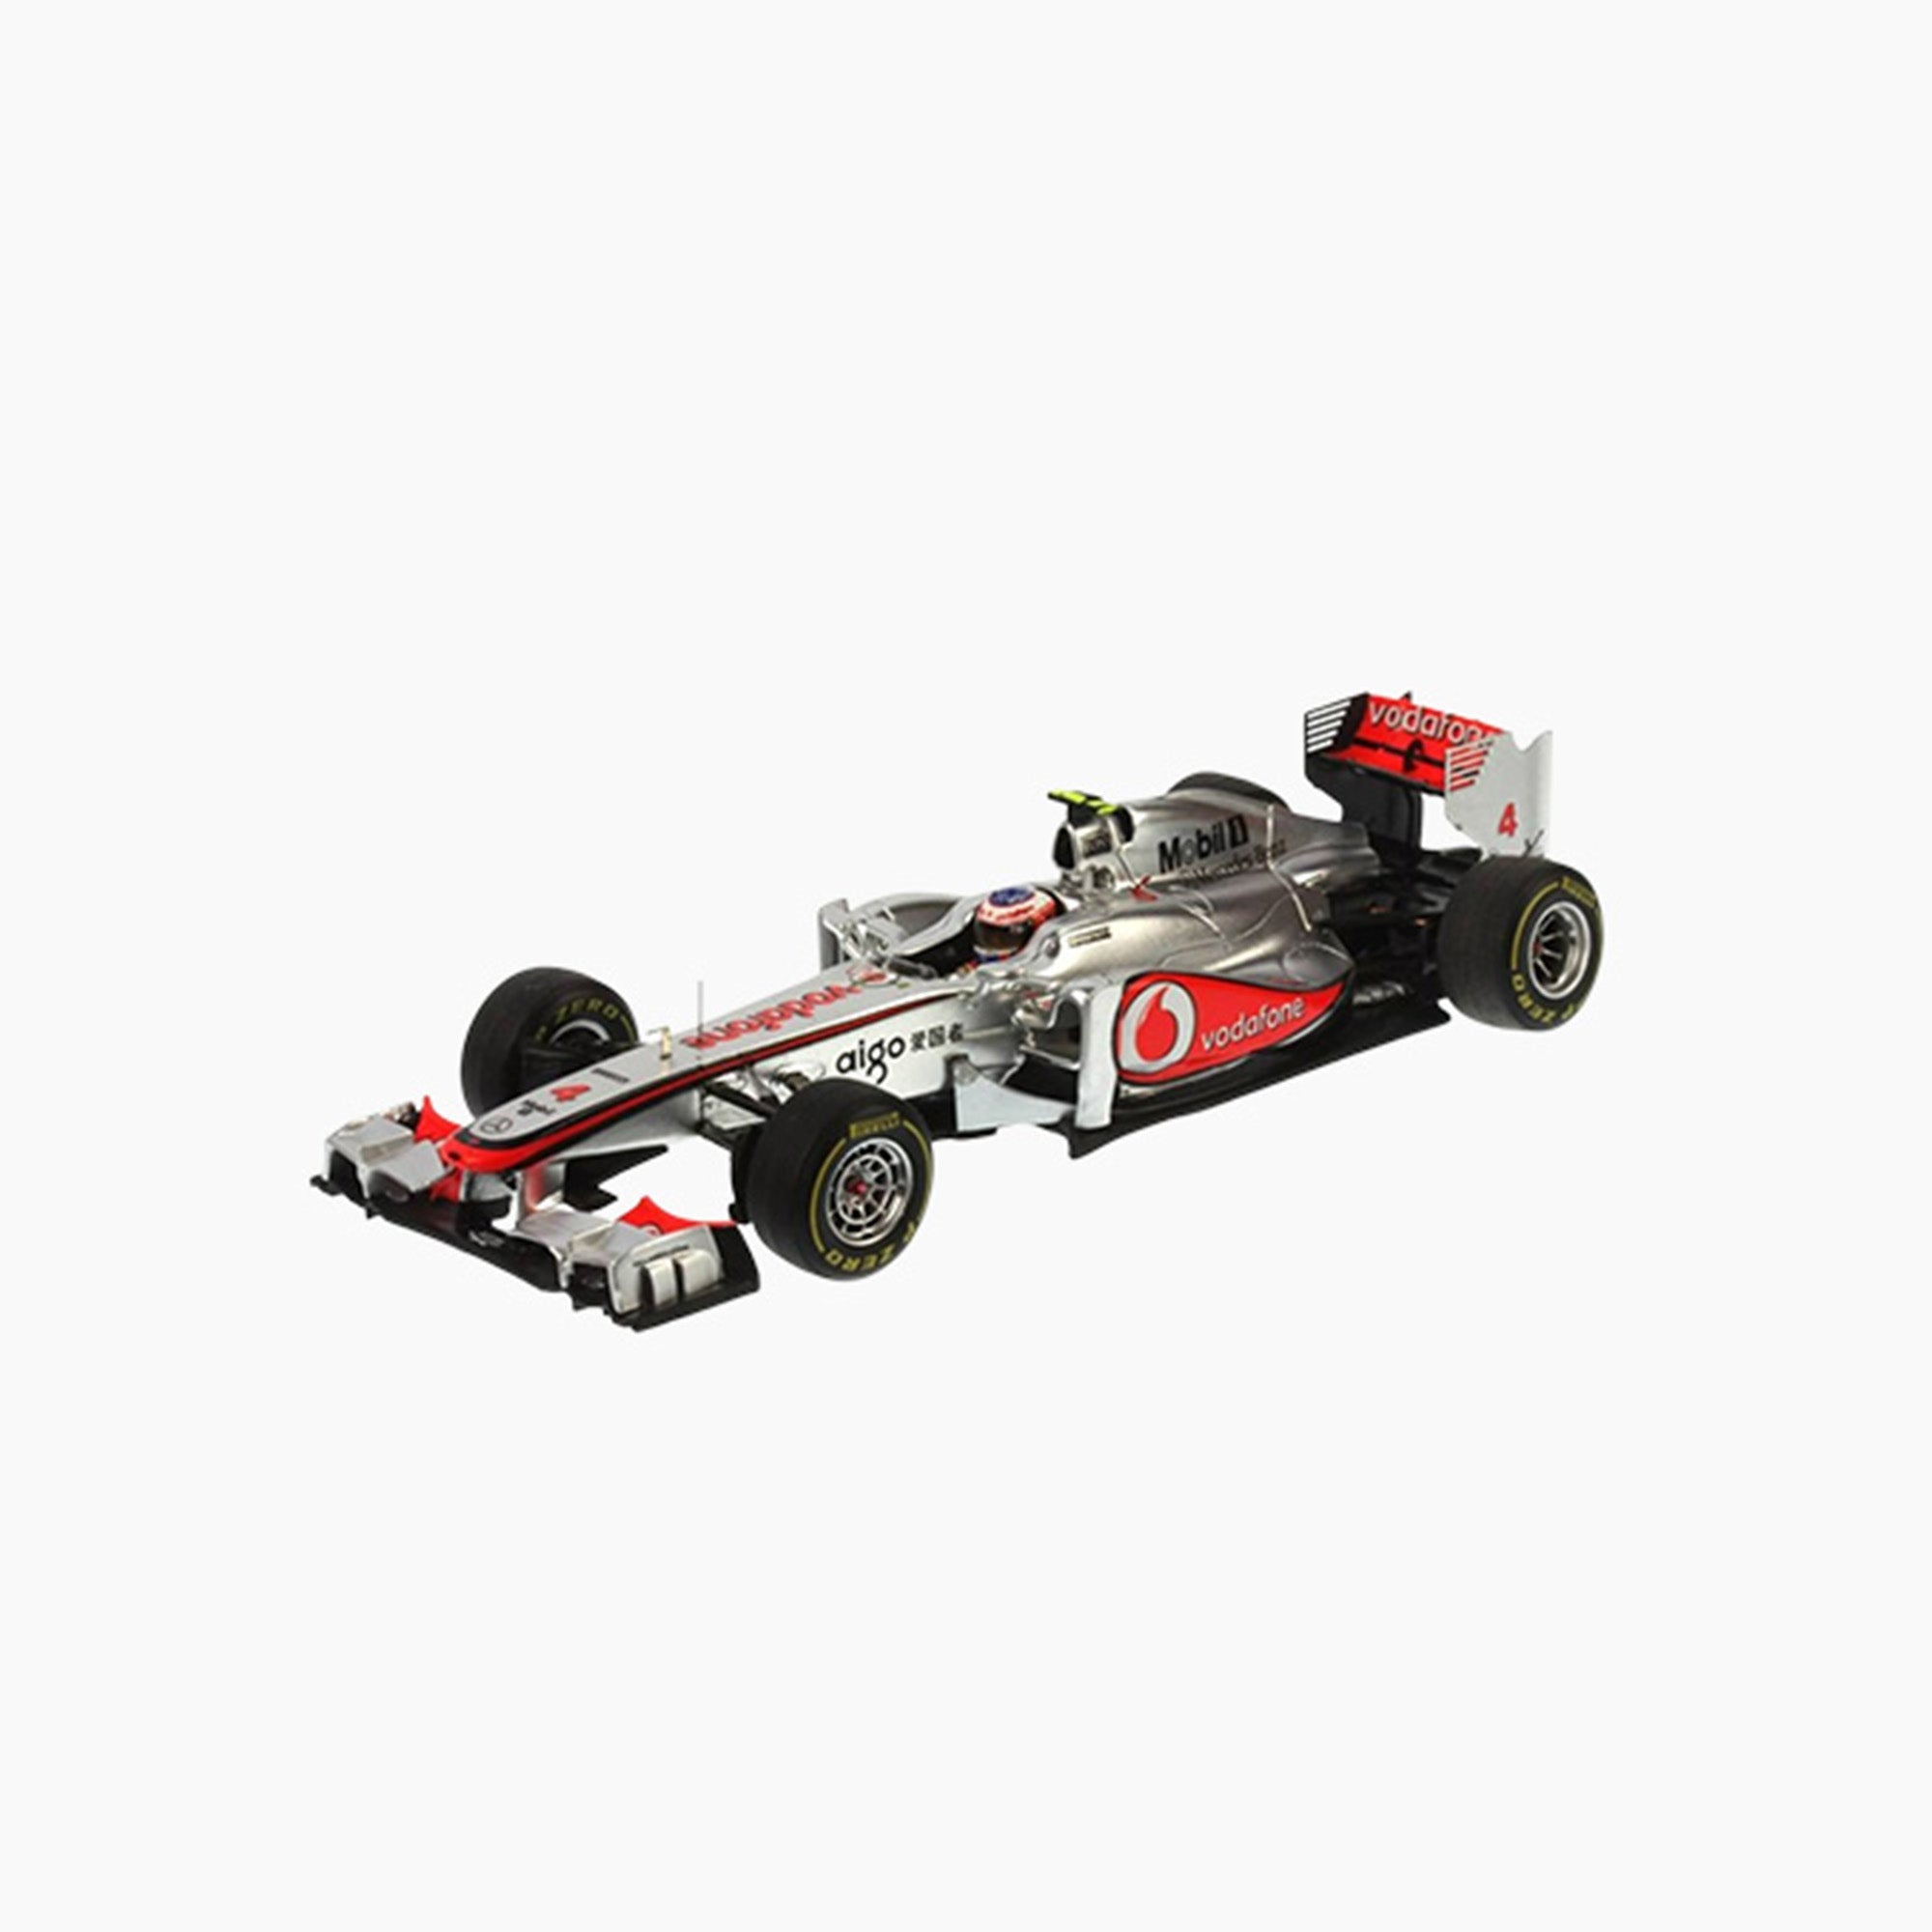 McLaren MP4-26 No. 4 and "200 GP" Winner Hungary GP 2011 | 1:43 Scale Model-1:43 Scale Model-Spark Models-gpx-store